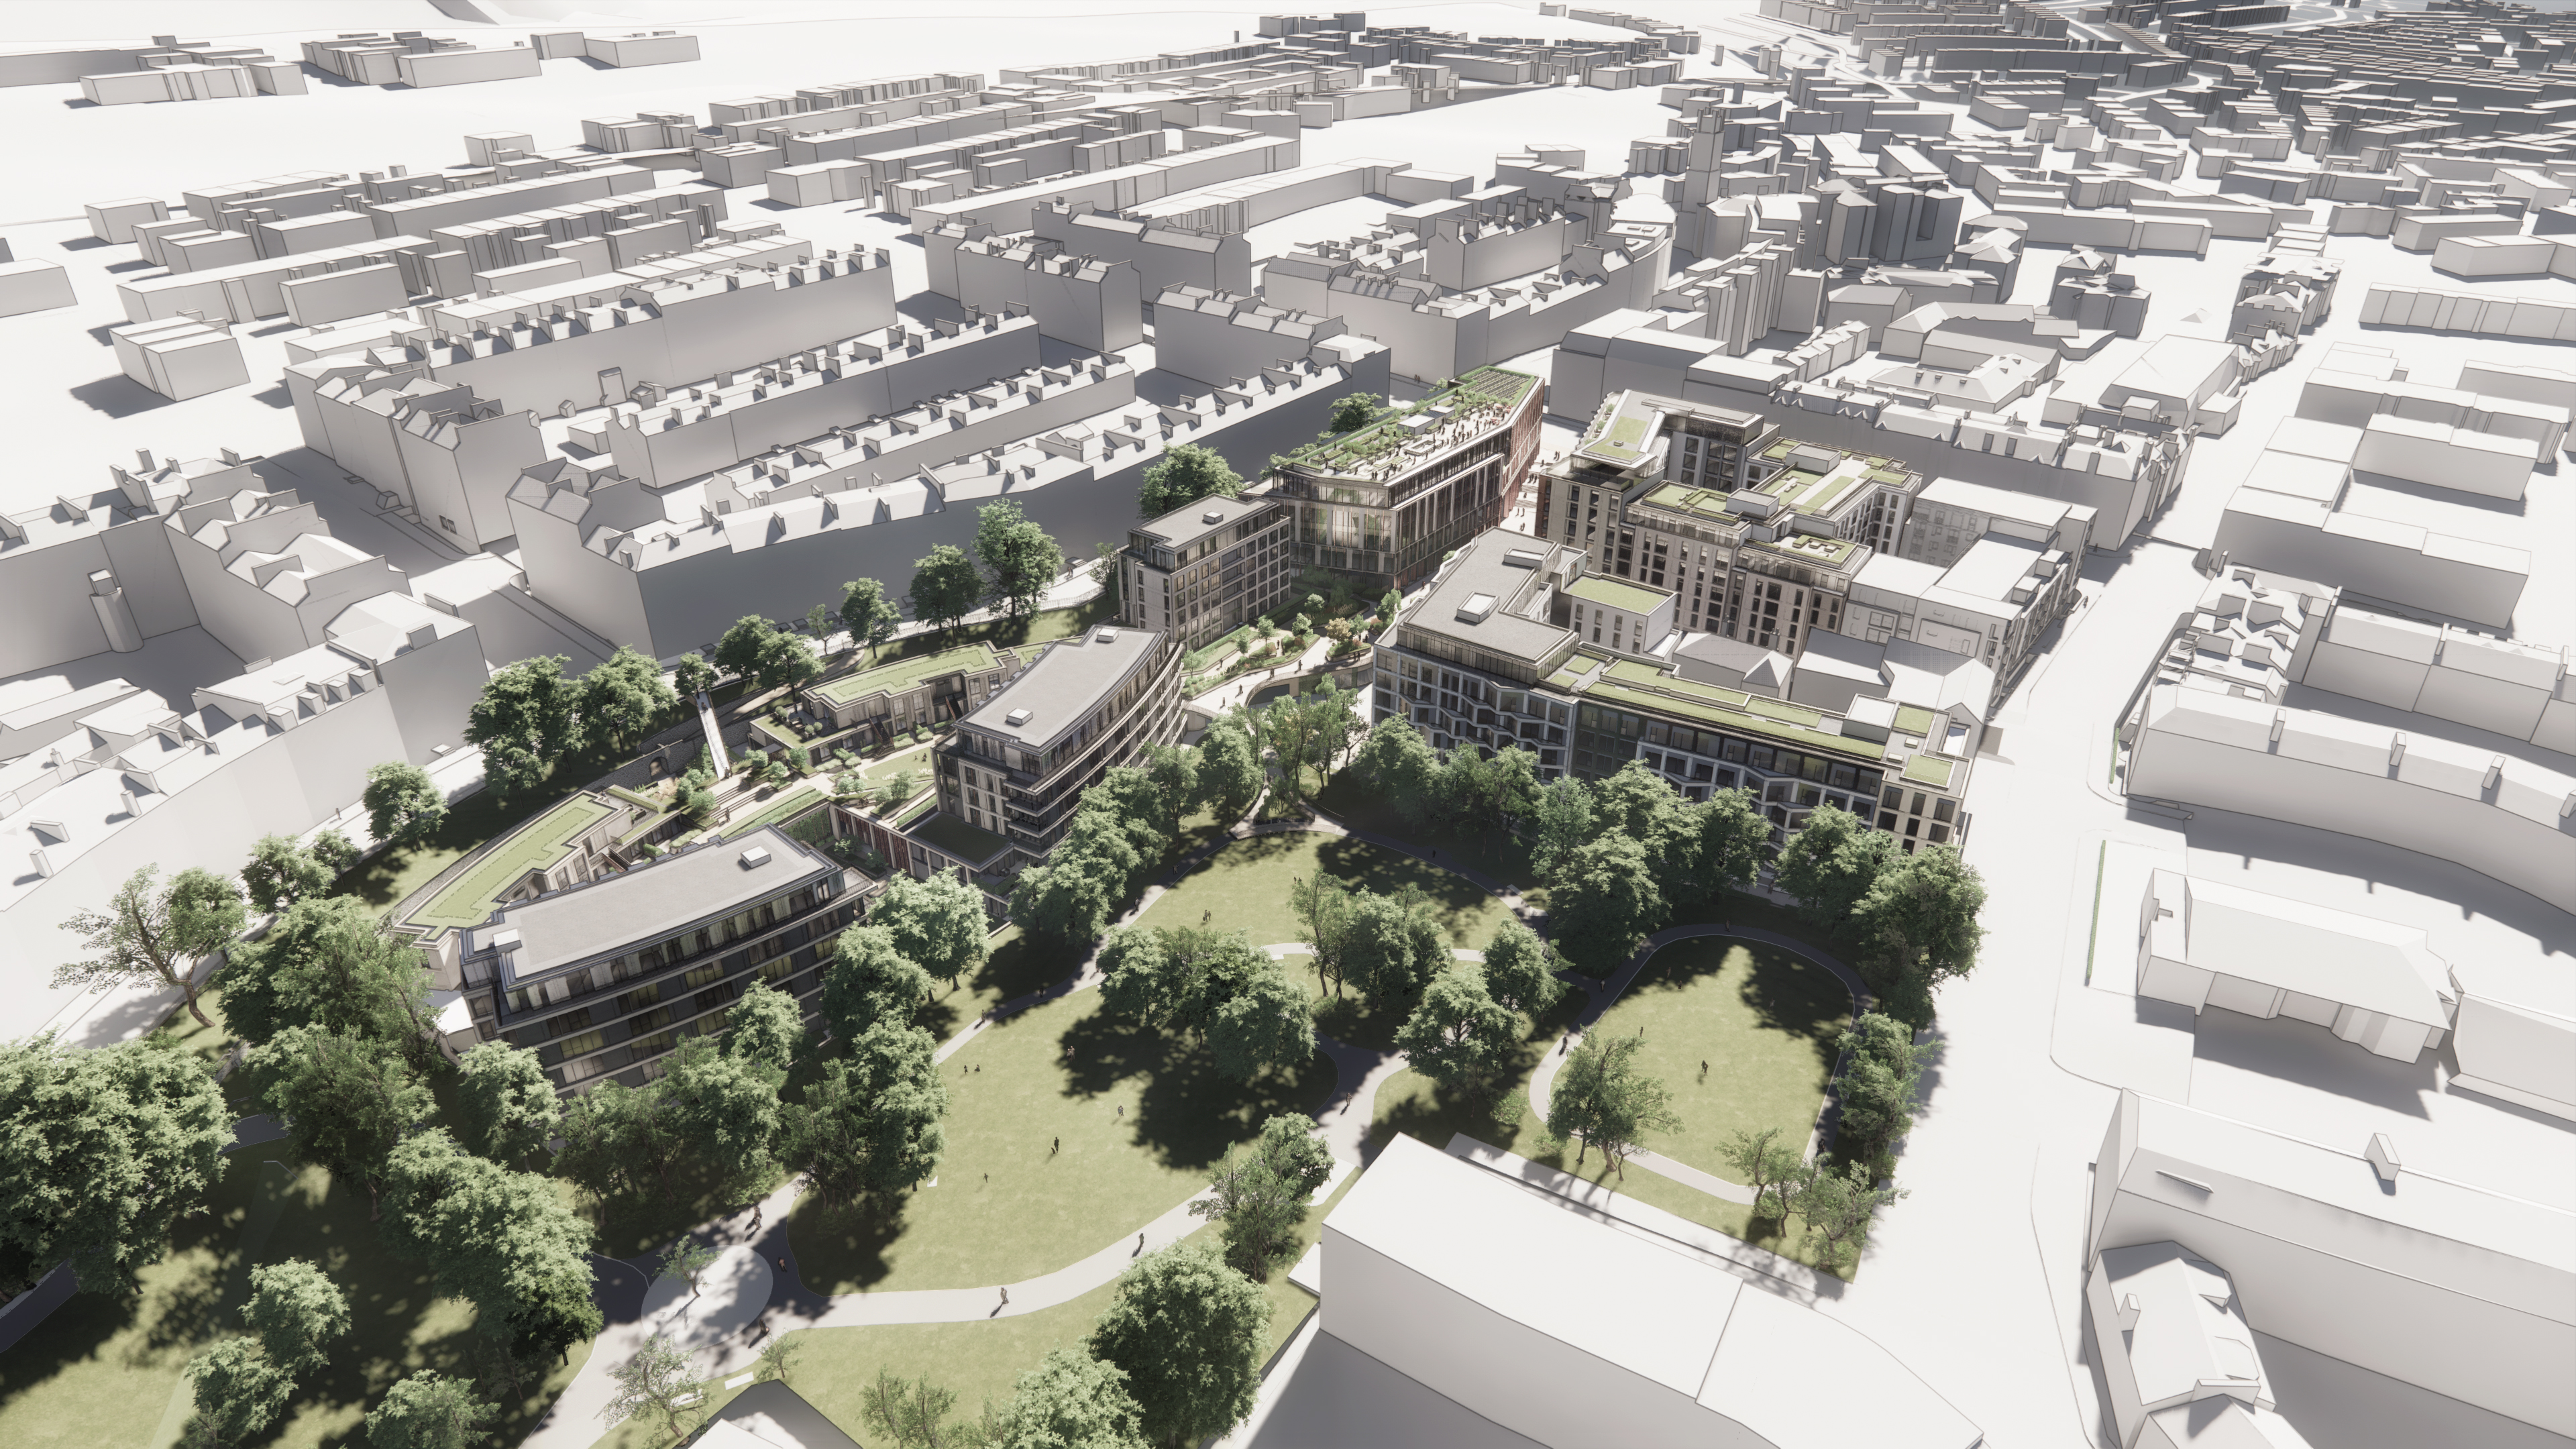 Plans submitted for Edinburgh's New Town Quarter development